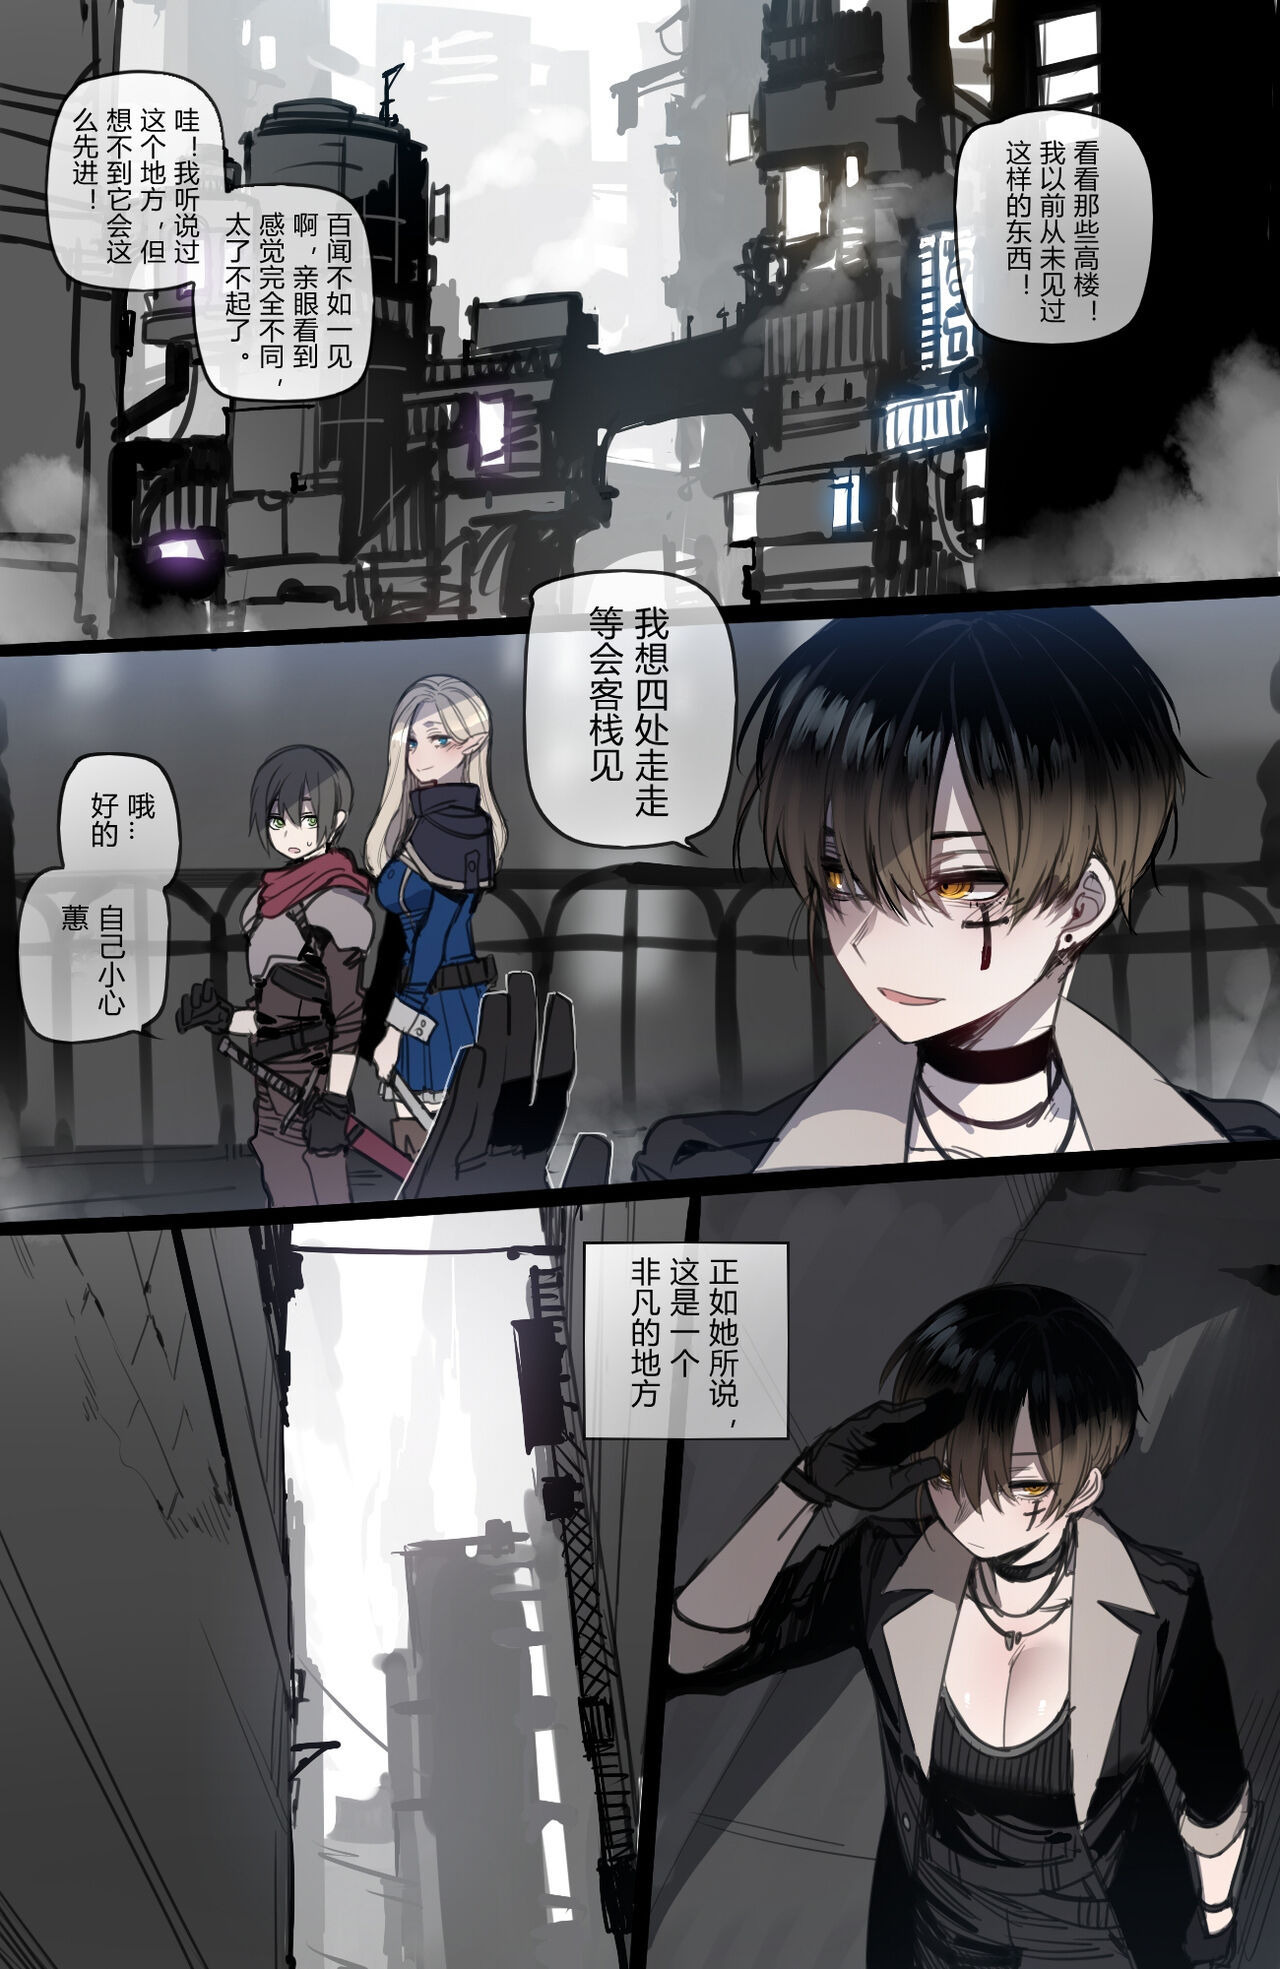 [ratatatat74] Bad Ending Party [chinese](Ongoing) 15